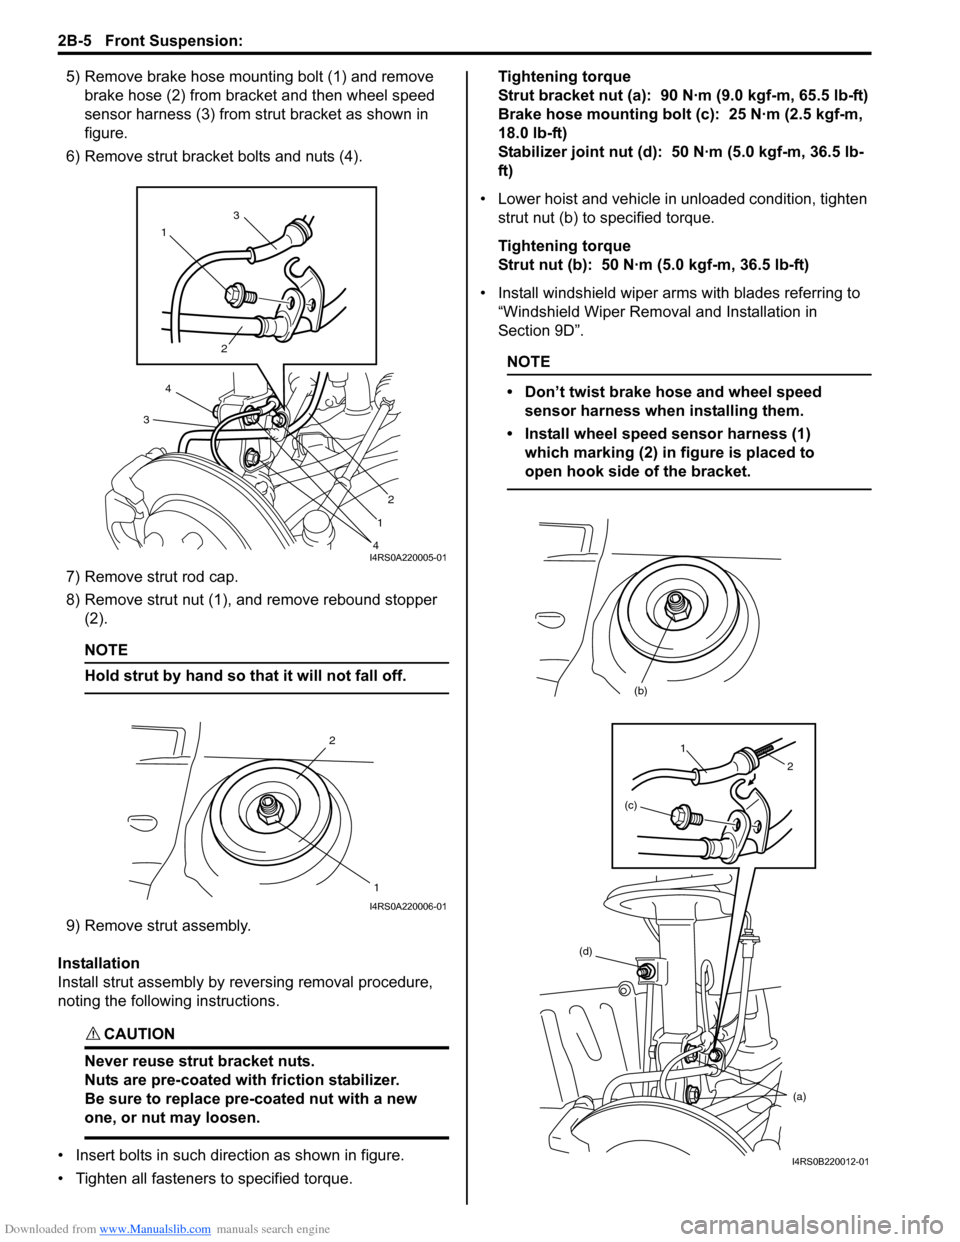 SUZUKI SWIFT 2005 2.G Service Workshop Manual Downloaded from www.Manualslib.com manuals search engine 2B-5 Front Suspension: 
5) Remove brake hose mounting bolt (1) and remove brake hose (2) from bracket and then wheel speed 
sensor harness (3) 